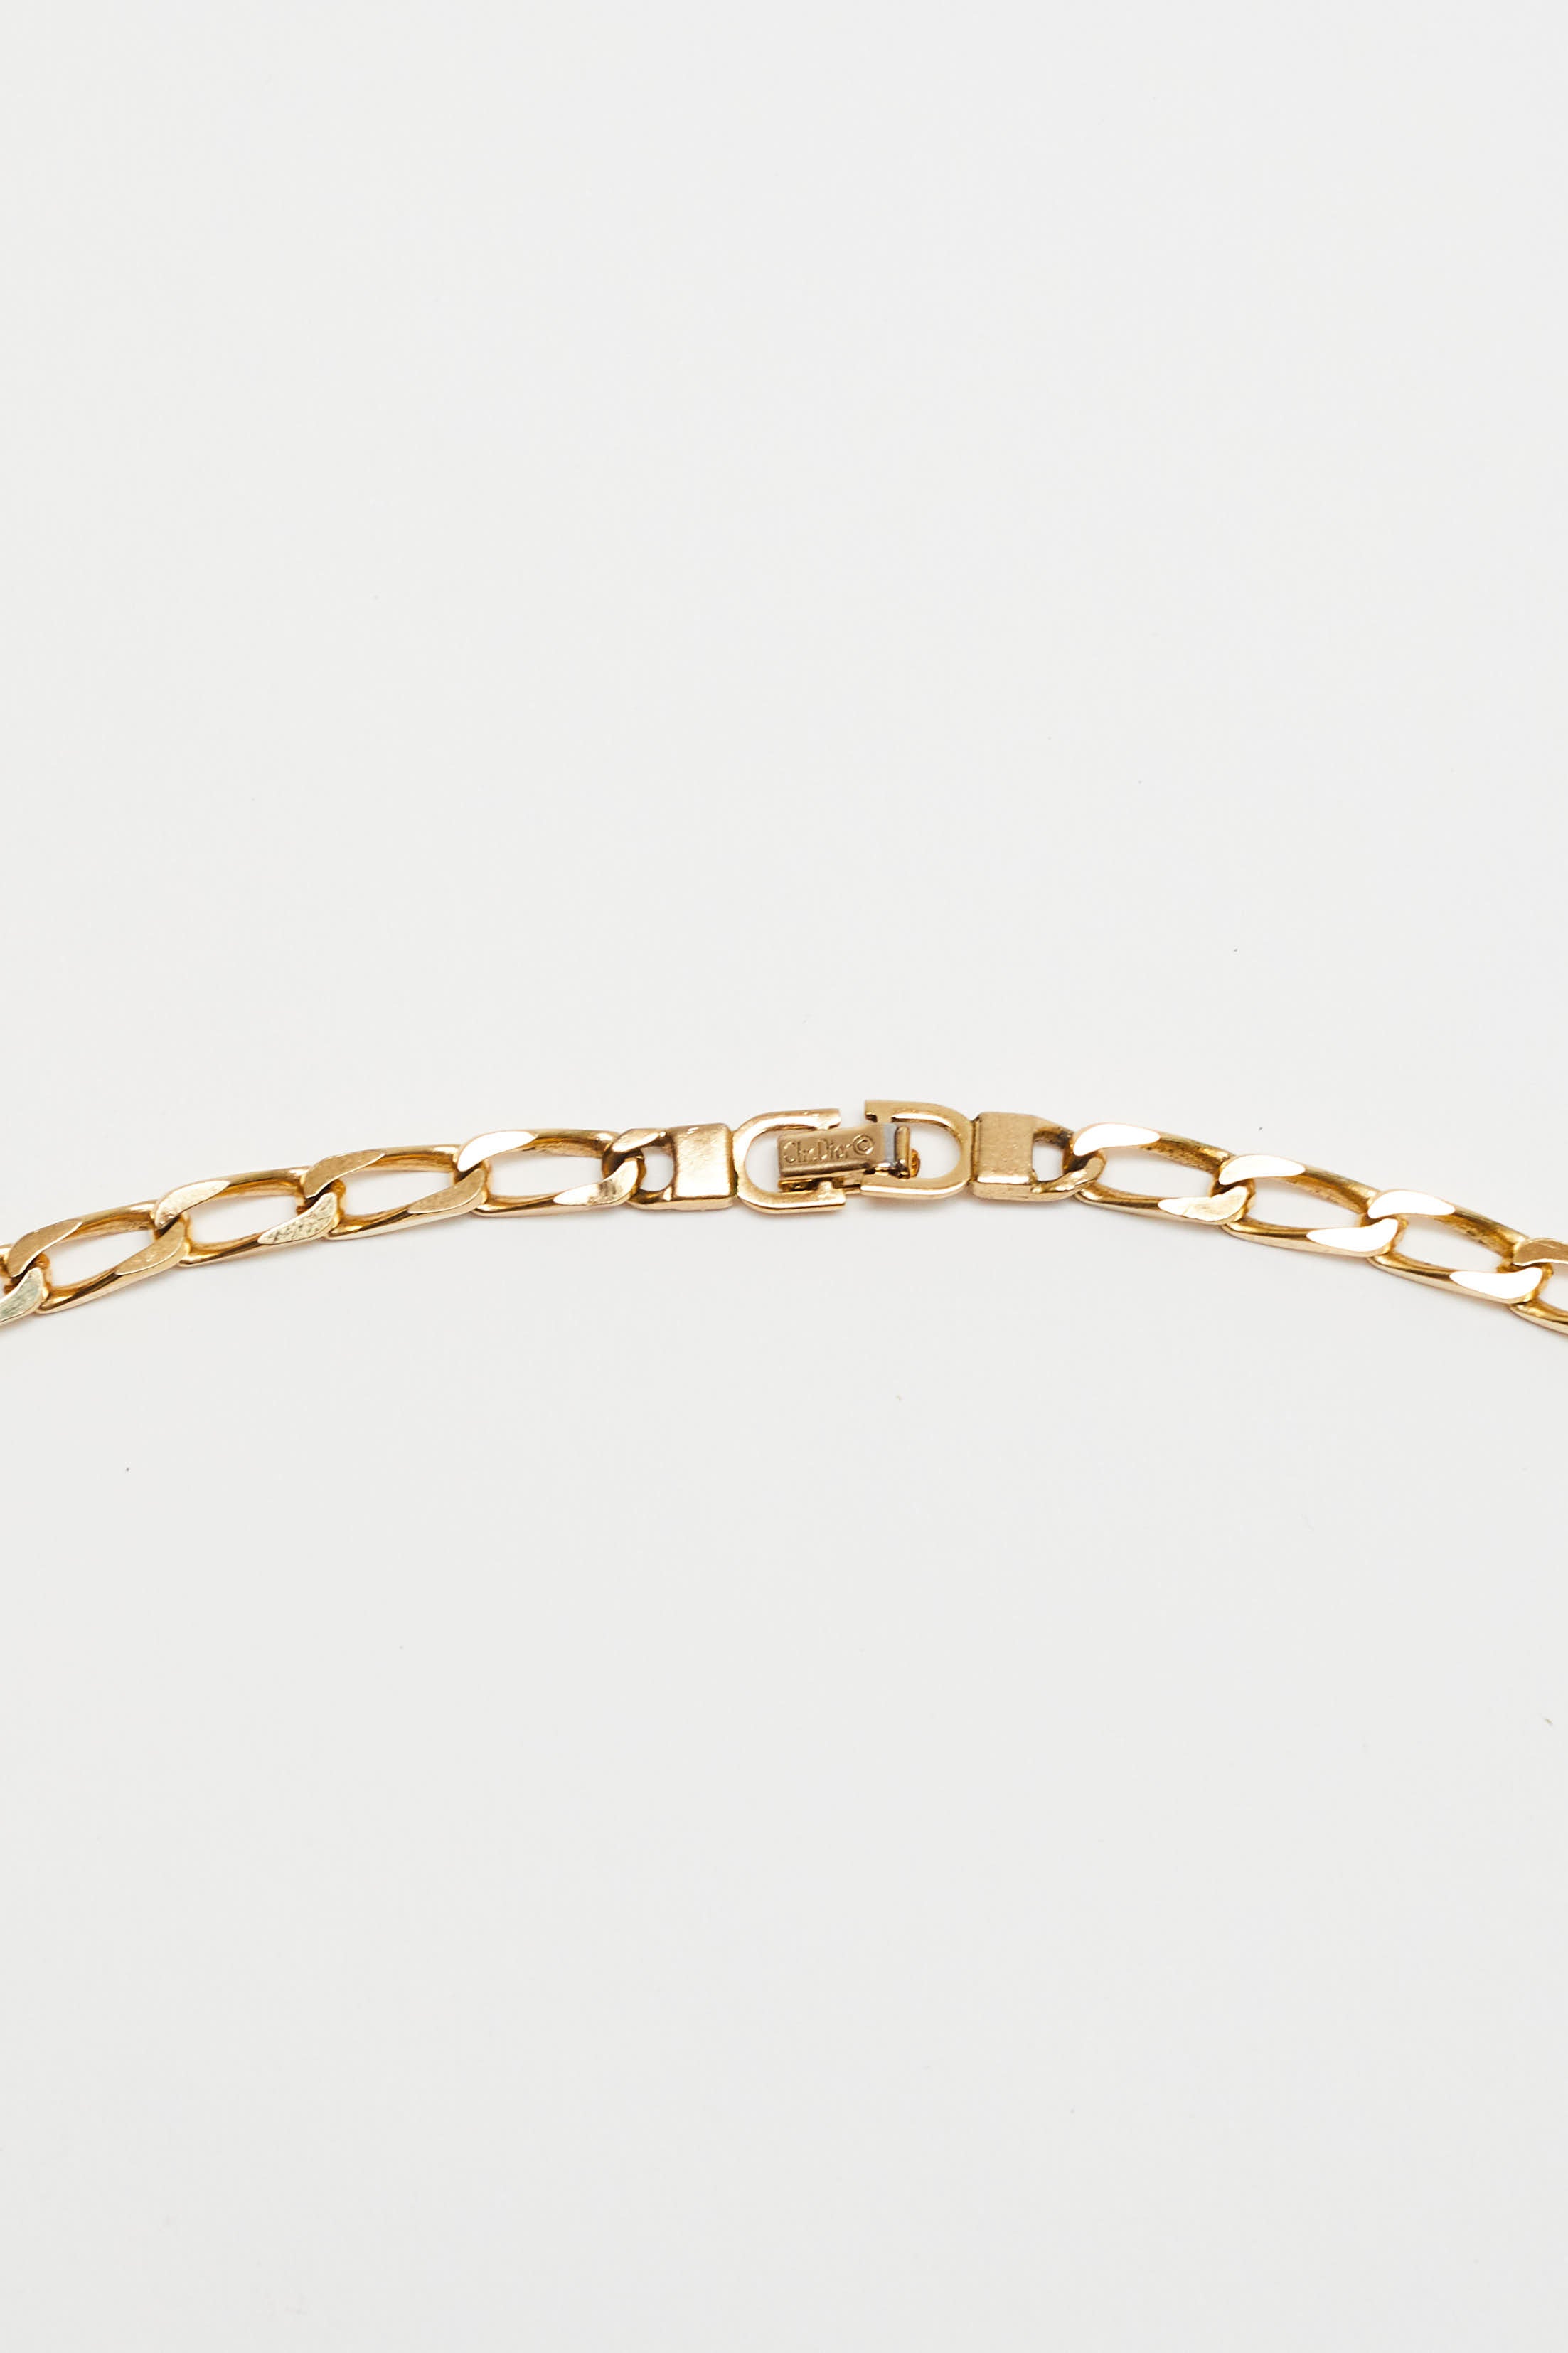 Christian Dior <br> 70's extra long gold plated chain link necklace